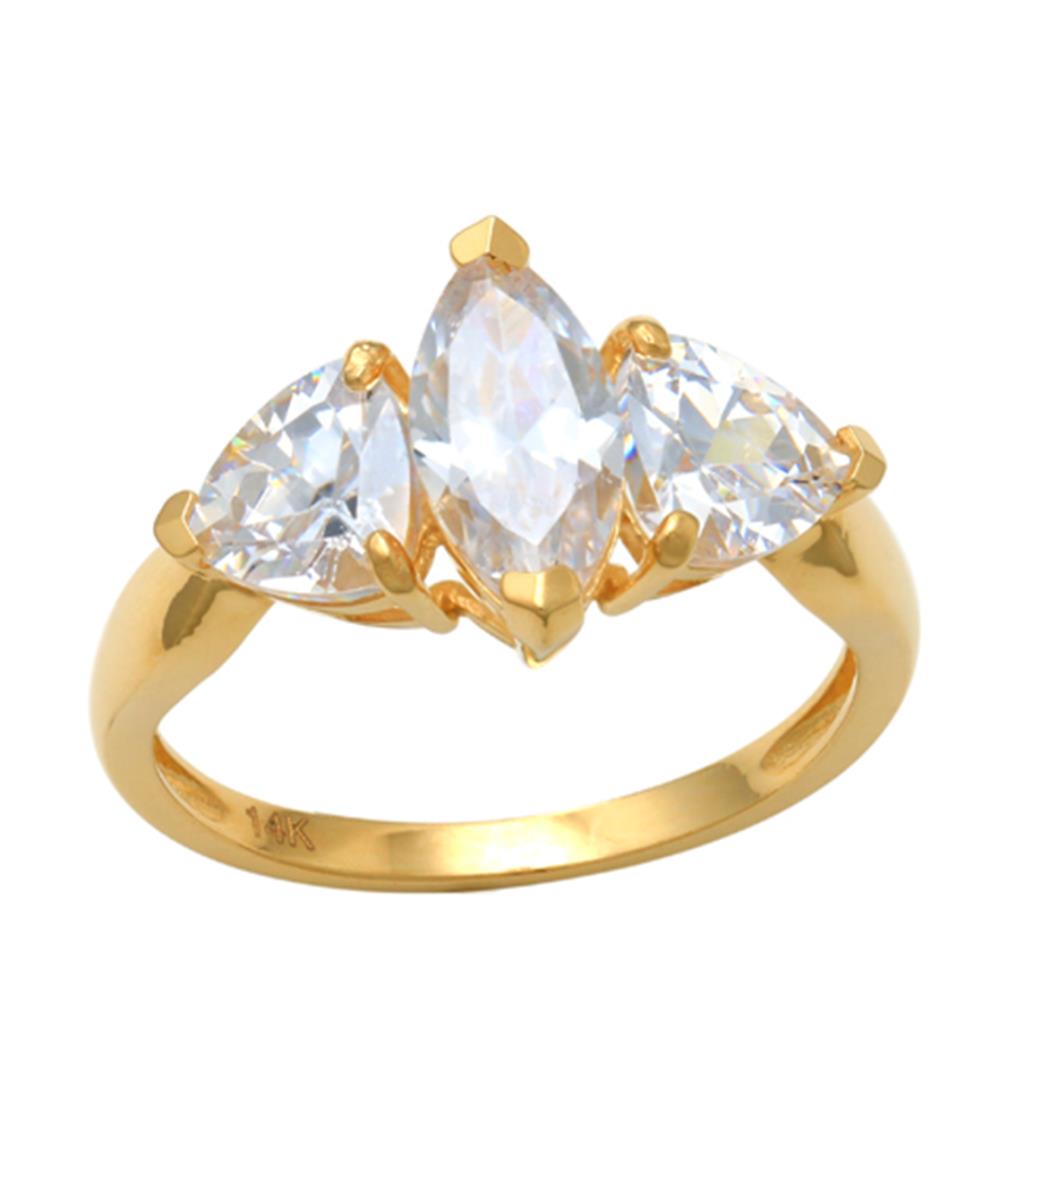 14K Yellow Gold Ma & Tl White CZ  Engagement Ring